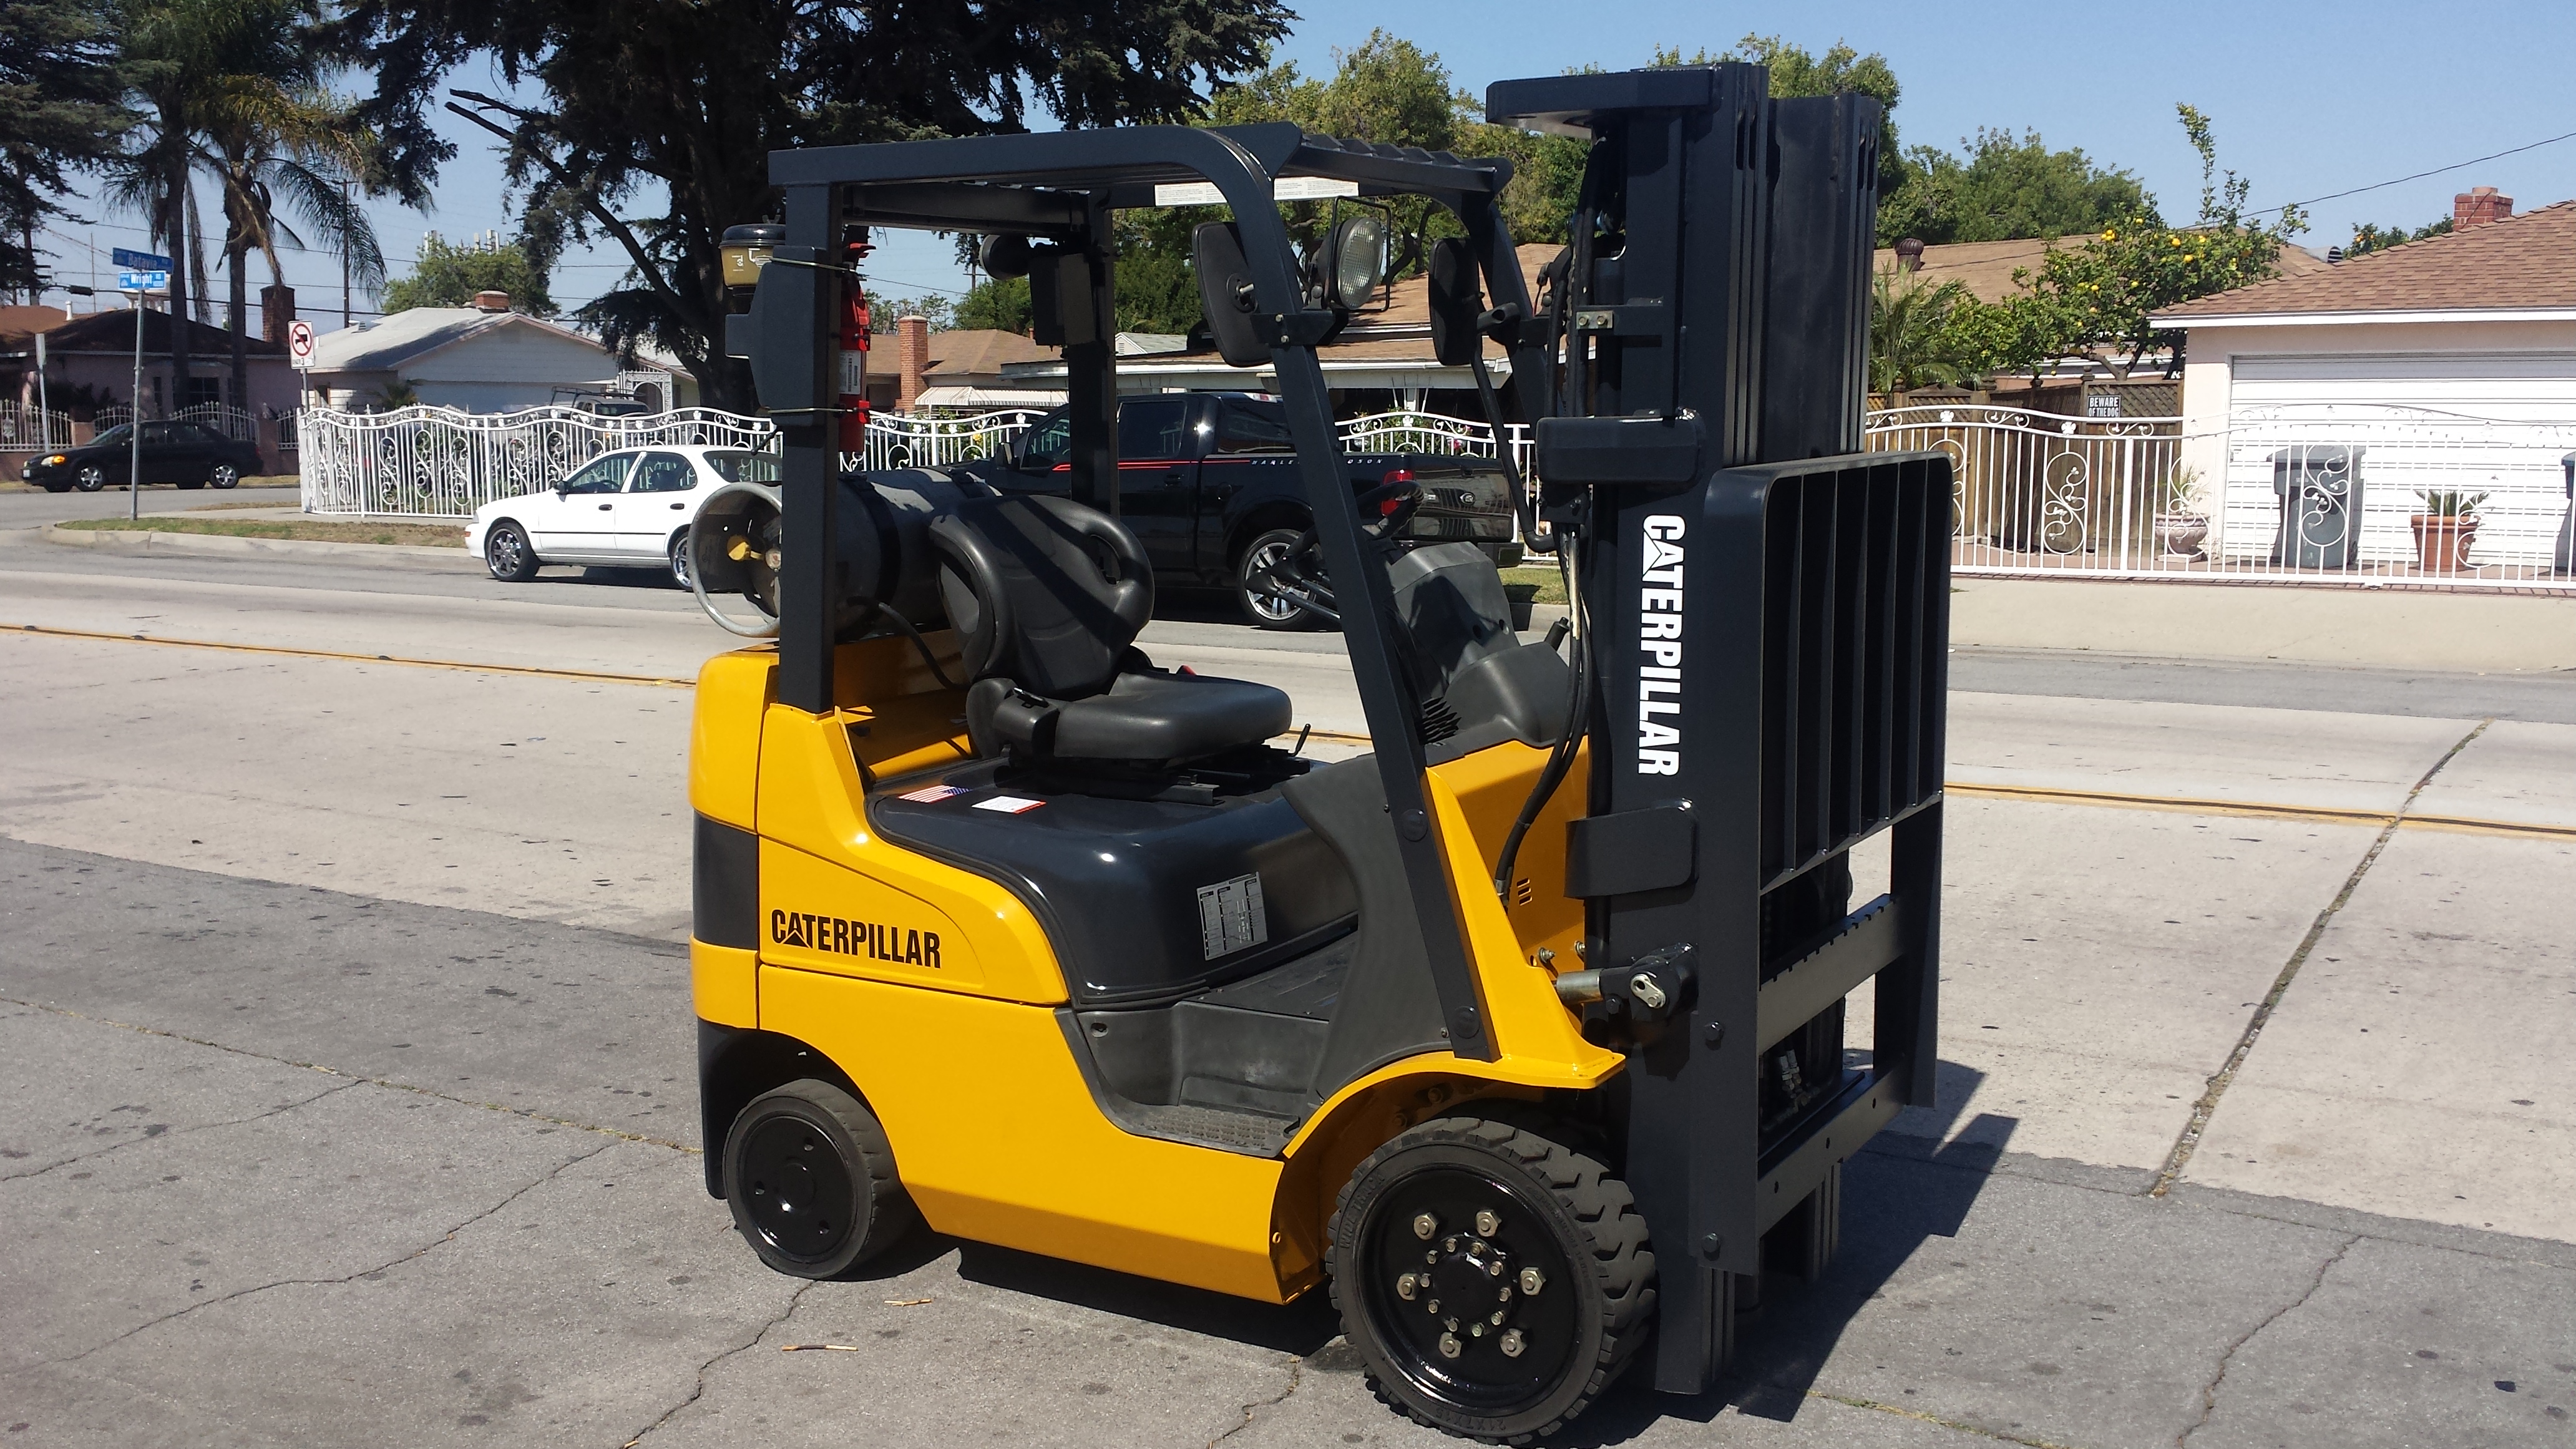 Used Forklift For Sale Southern California Forklift Rentals And Sale